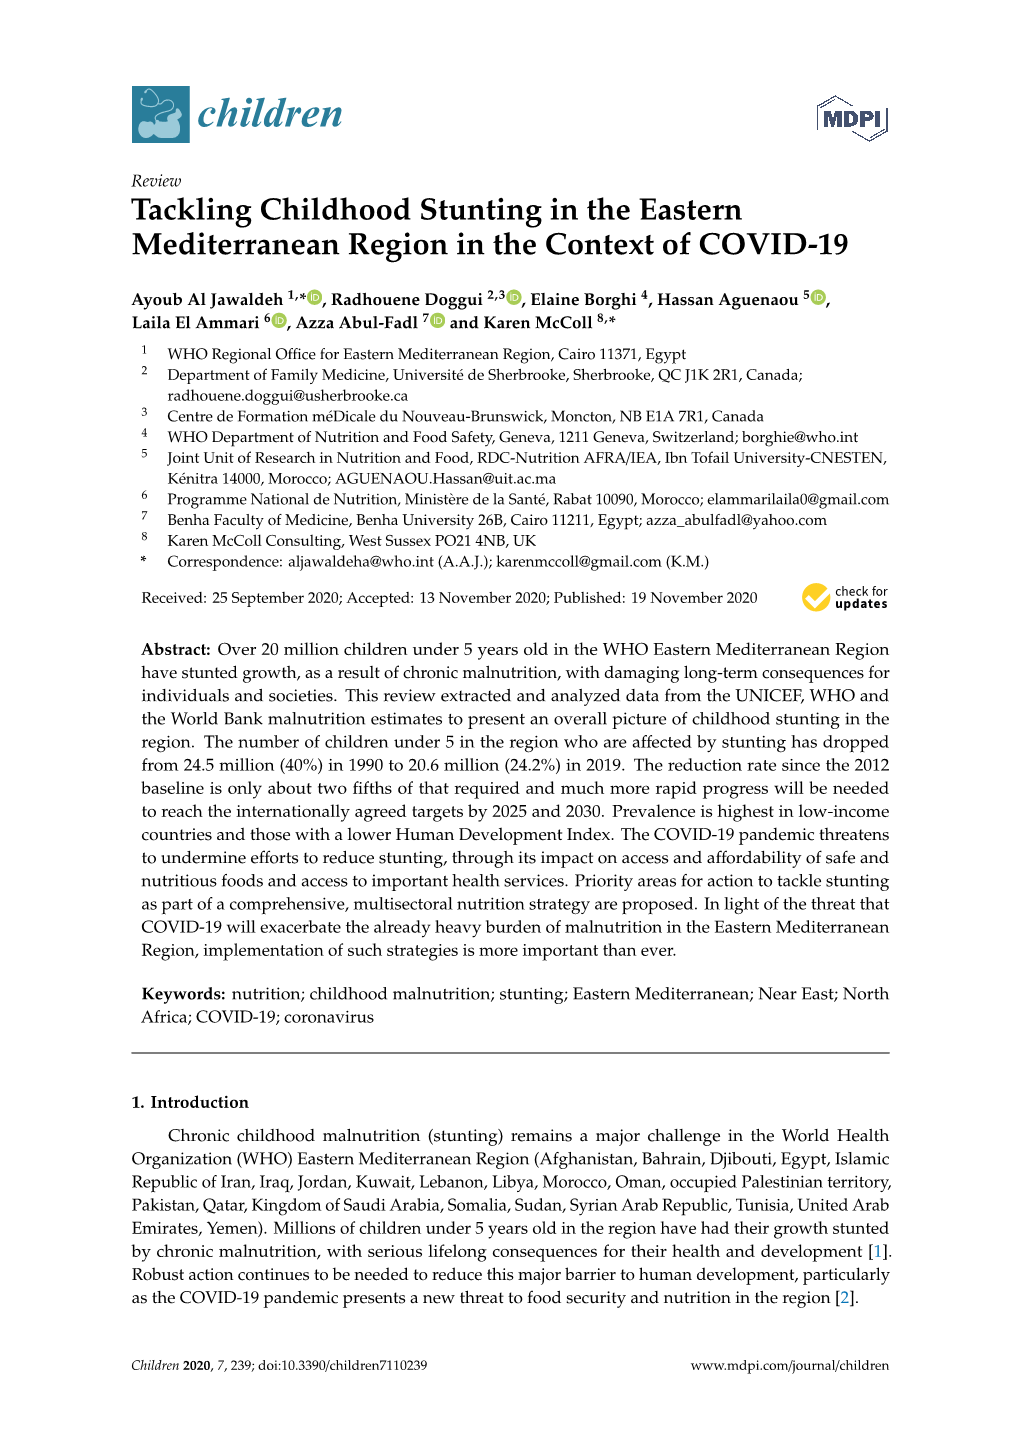 Tackling Childhood Stunting in the Eastern Mediterranean Region in the Context of COVID-19